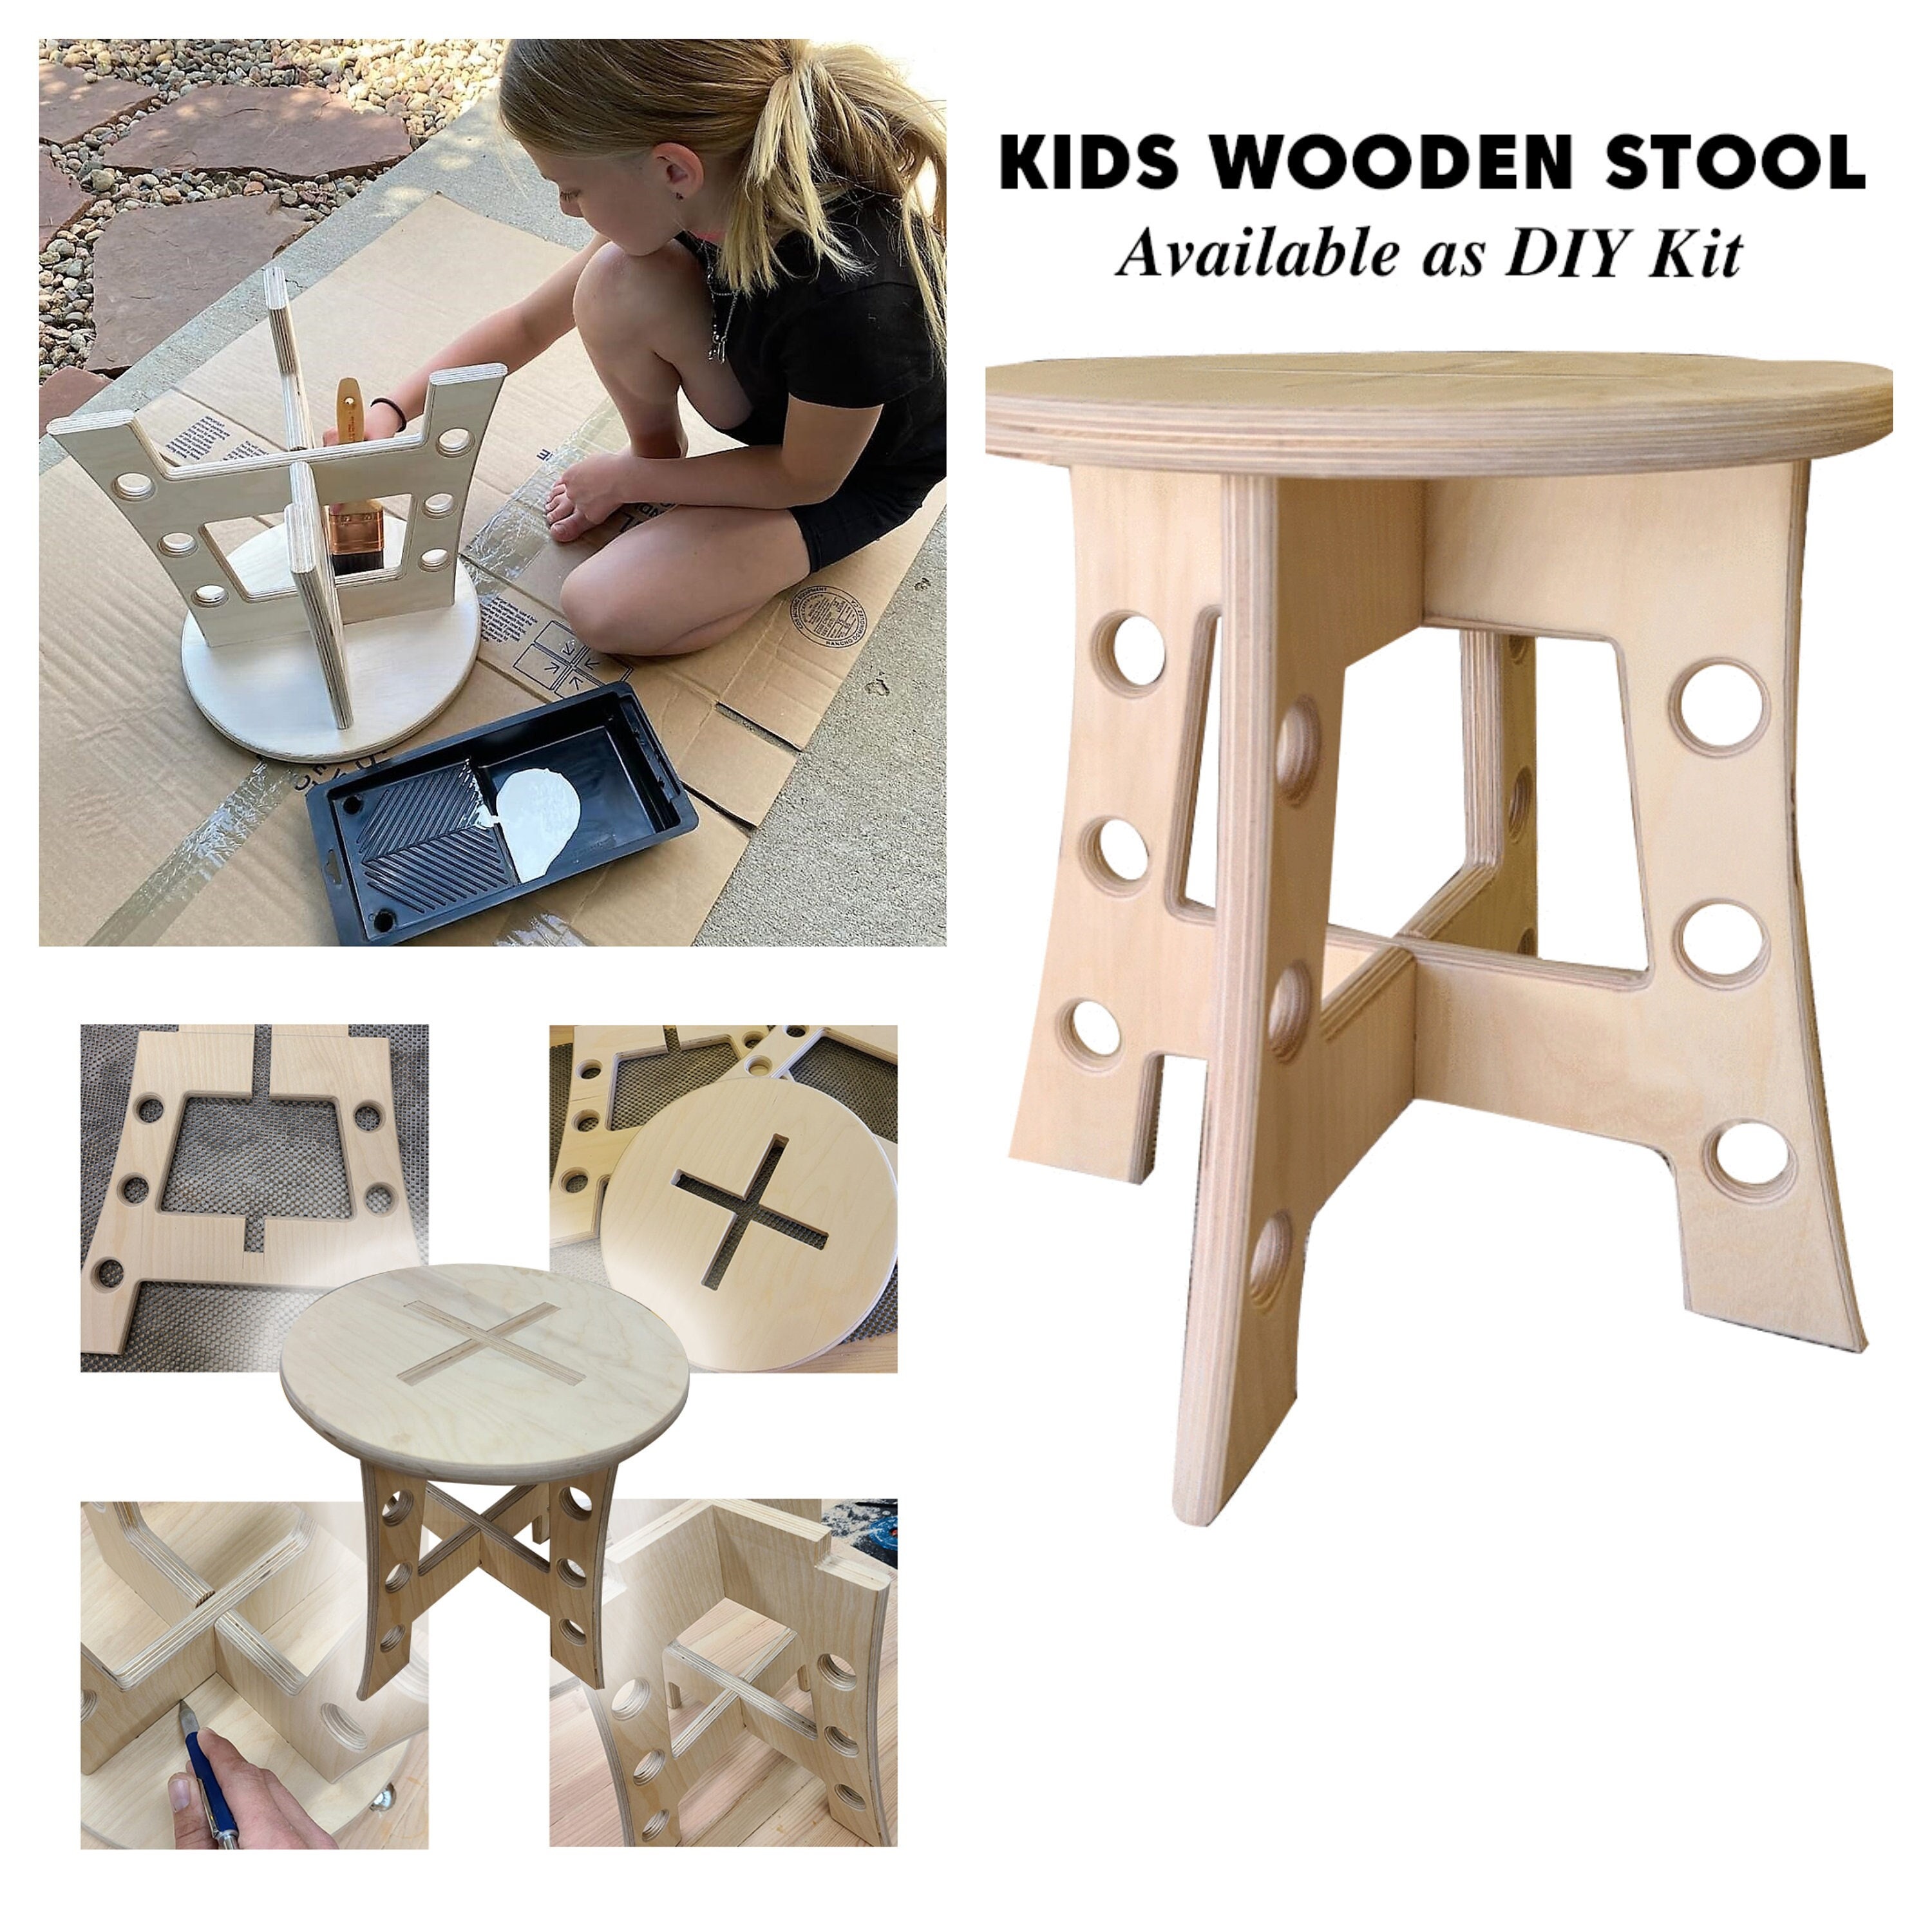 Build It Yourself Woodworking Kit